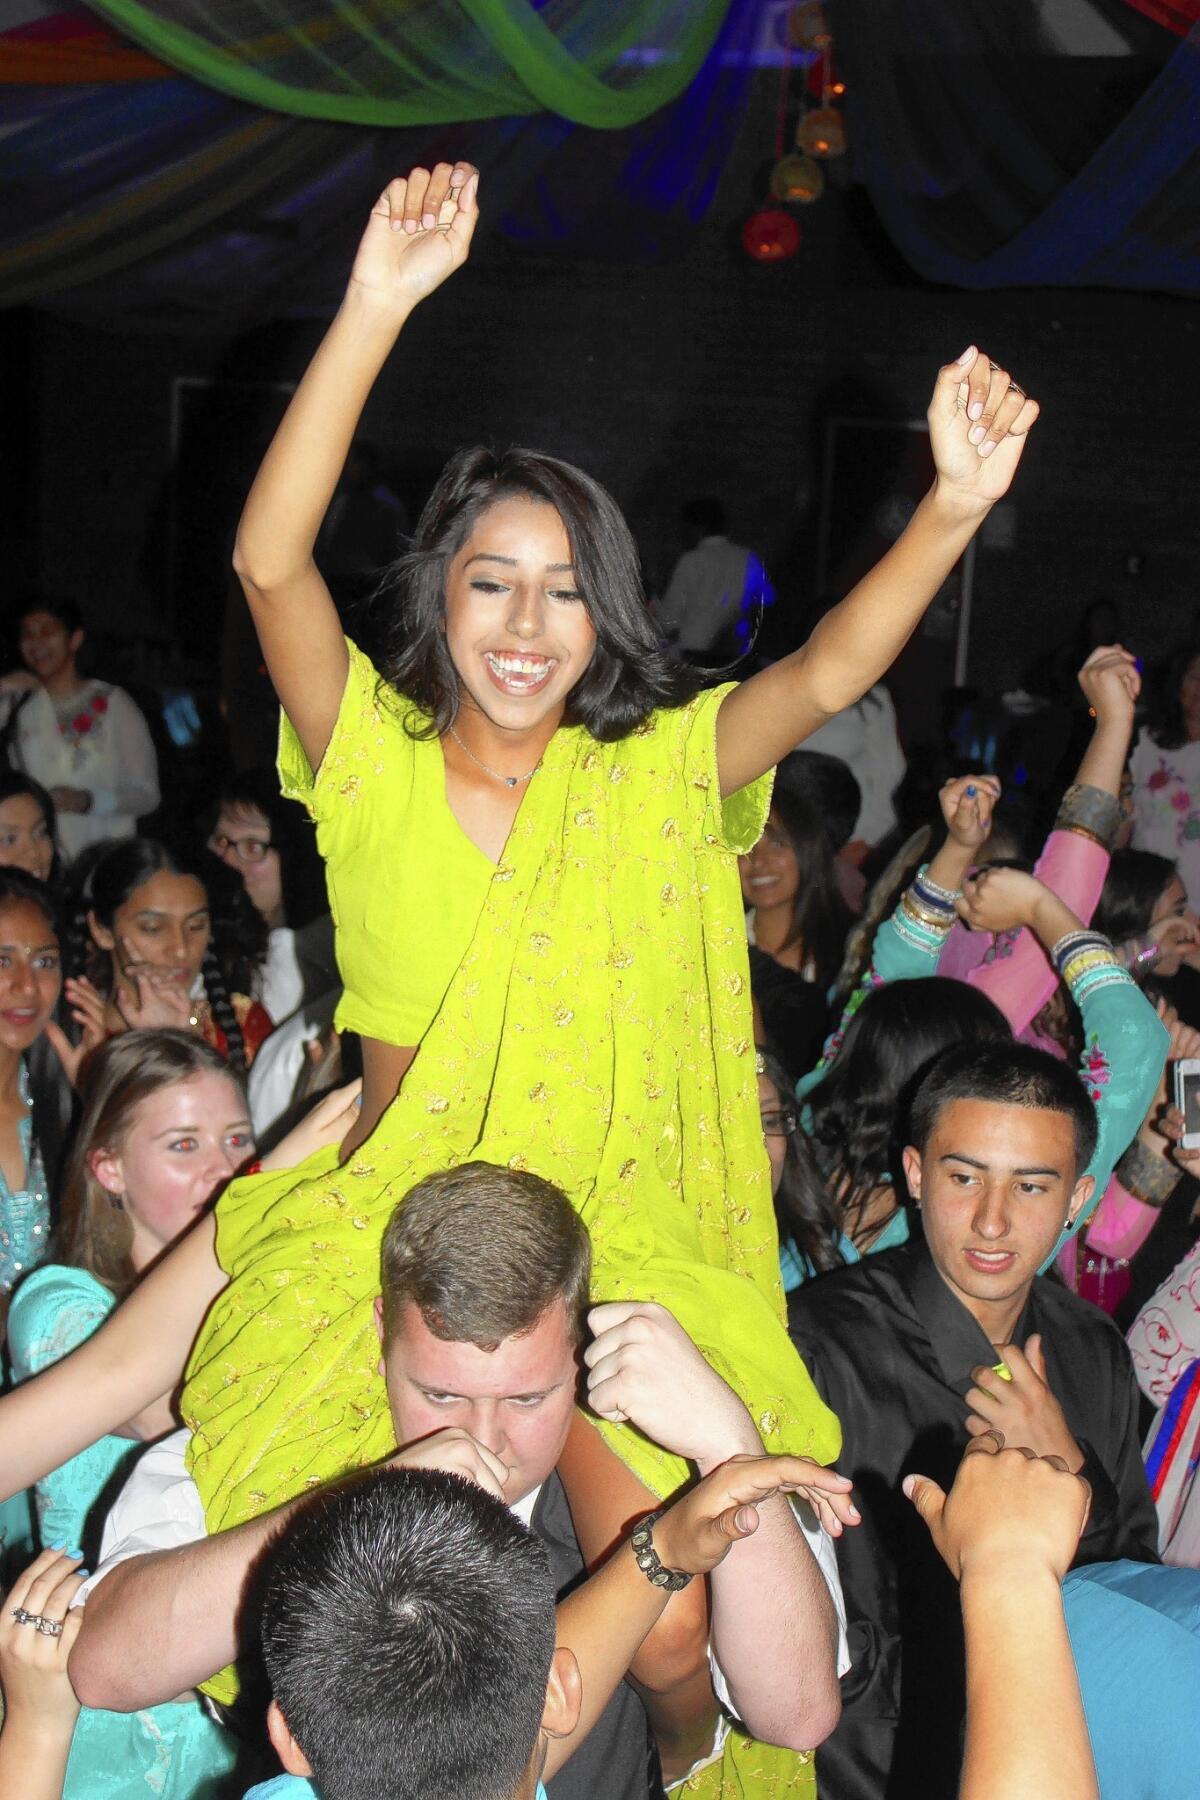 Students wearing colorful outfits get in the spirit at the Bollywood dance at Fowler High School in Fowler, Calif.